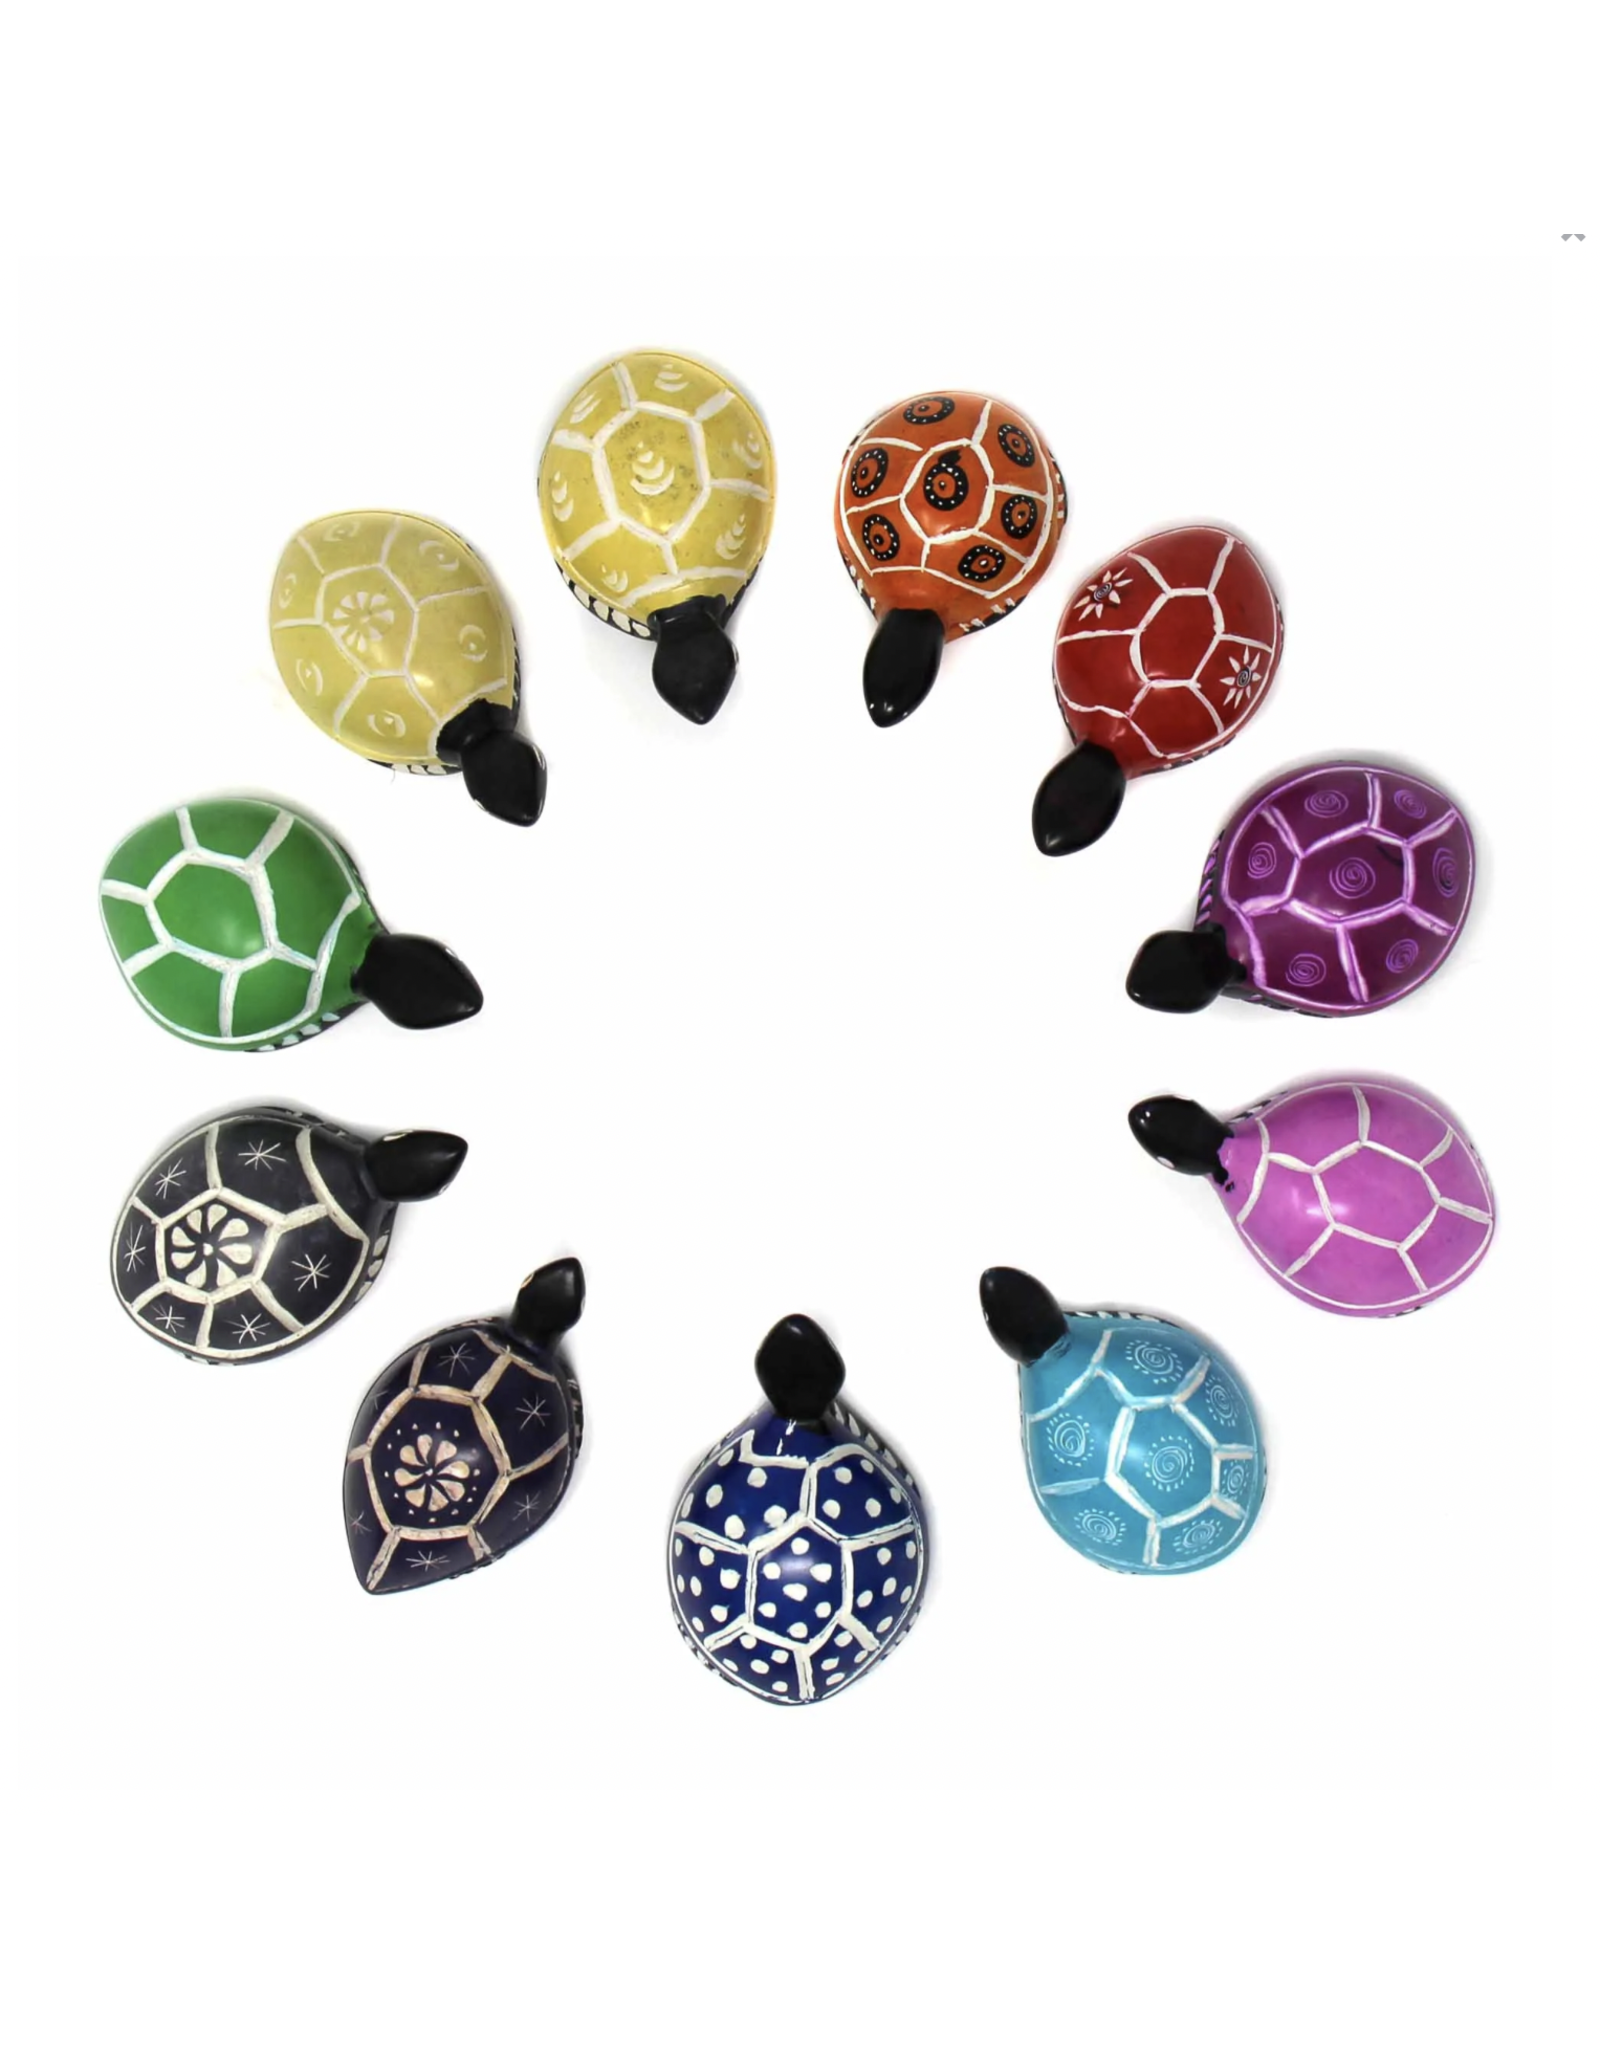 Trade roots Soapstone Turtle, 3.5" Assorted Colors